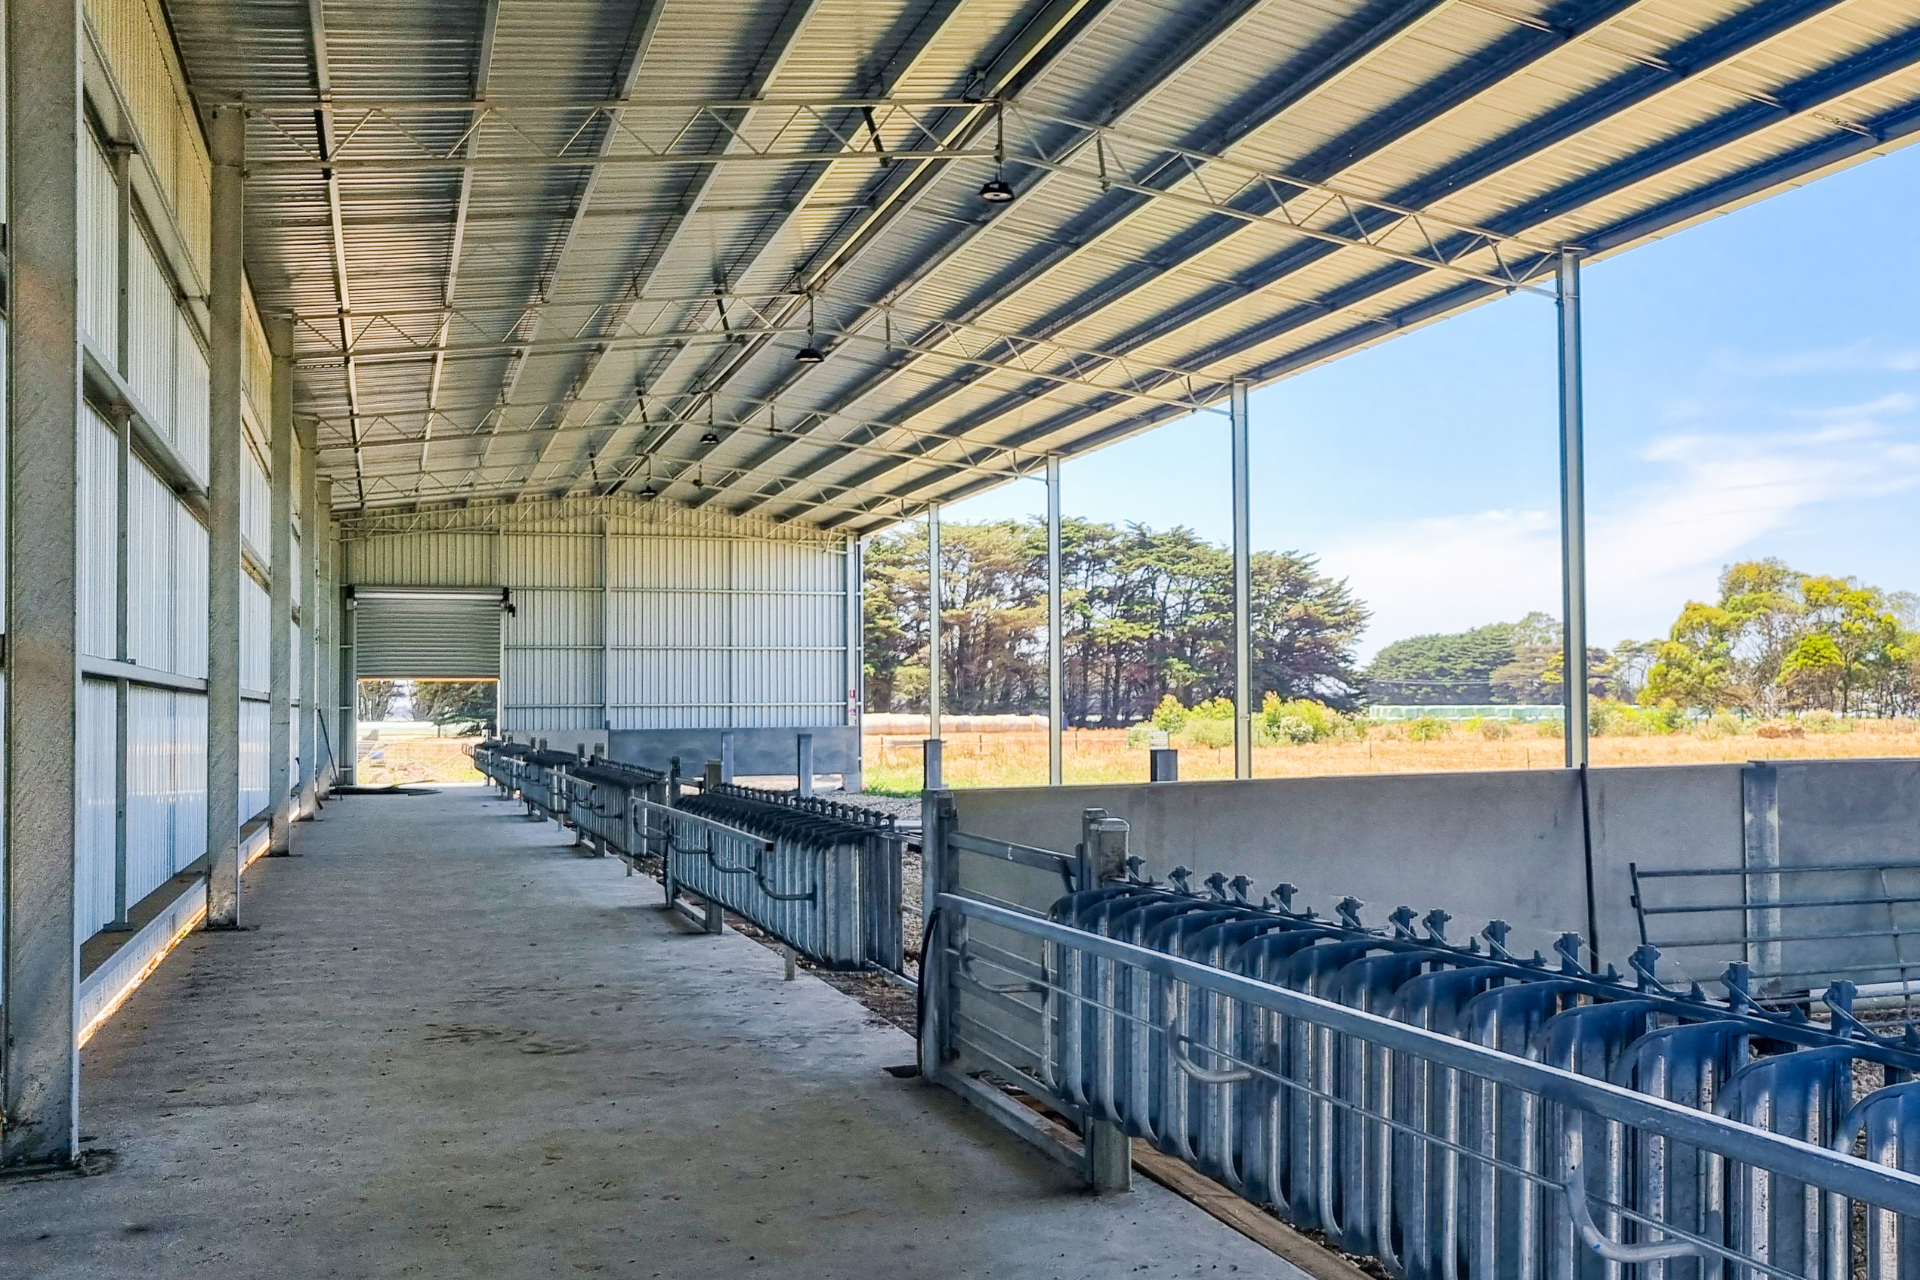 You are currently viewing 48m x 12m x 6m calf shed